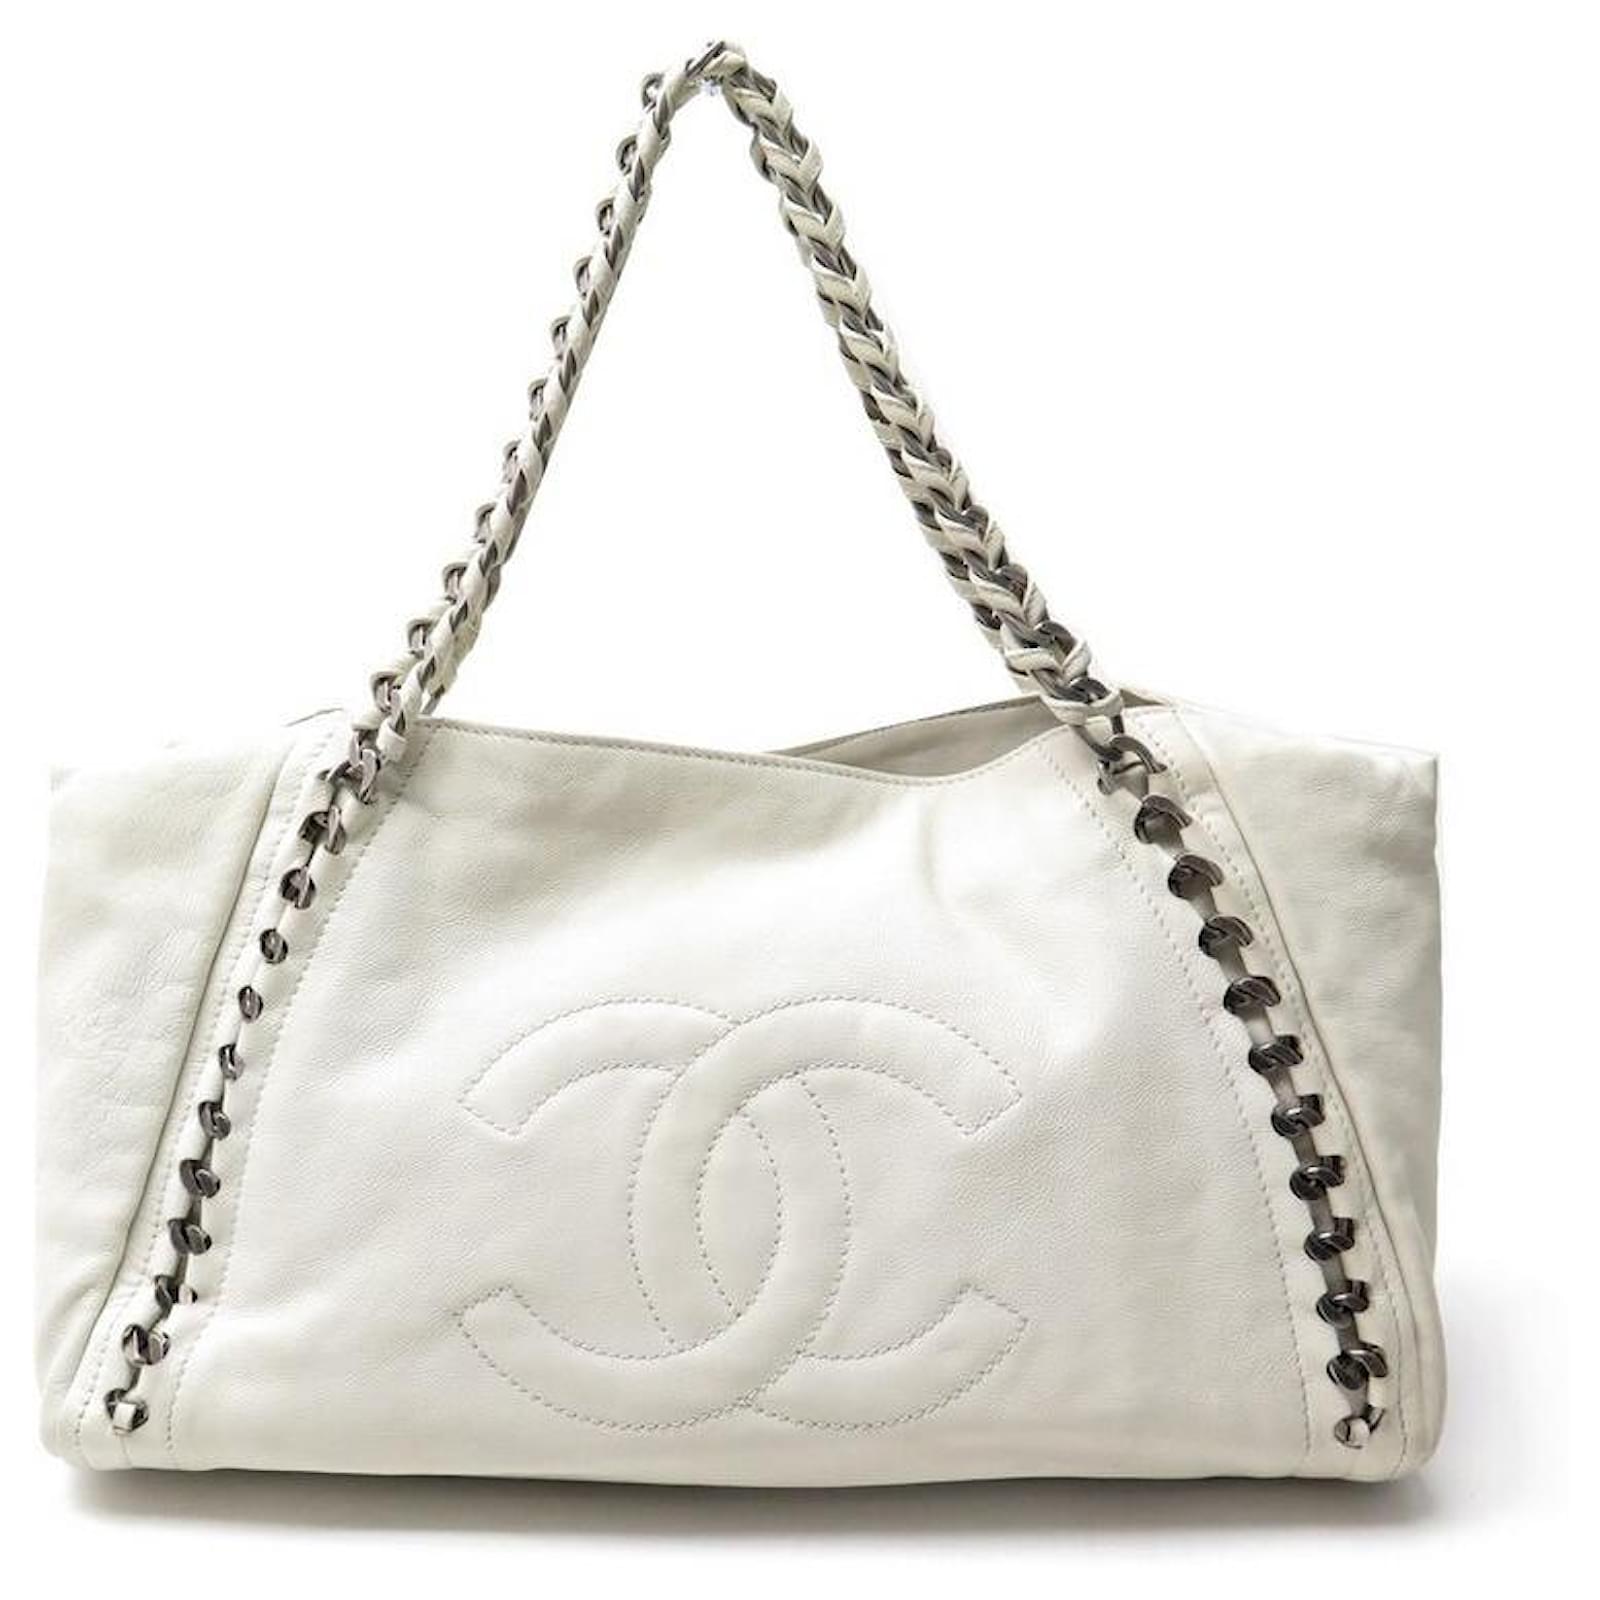 CHANEL CABAS SHOPPING GM WHITE LEATHER LEATHER HAND TOTE BAG ref